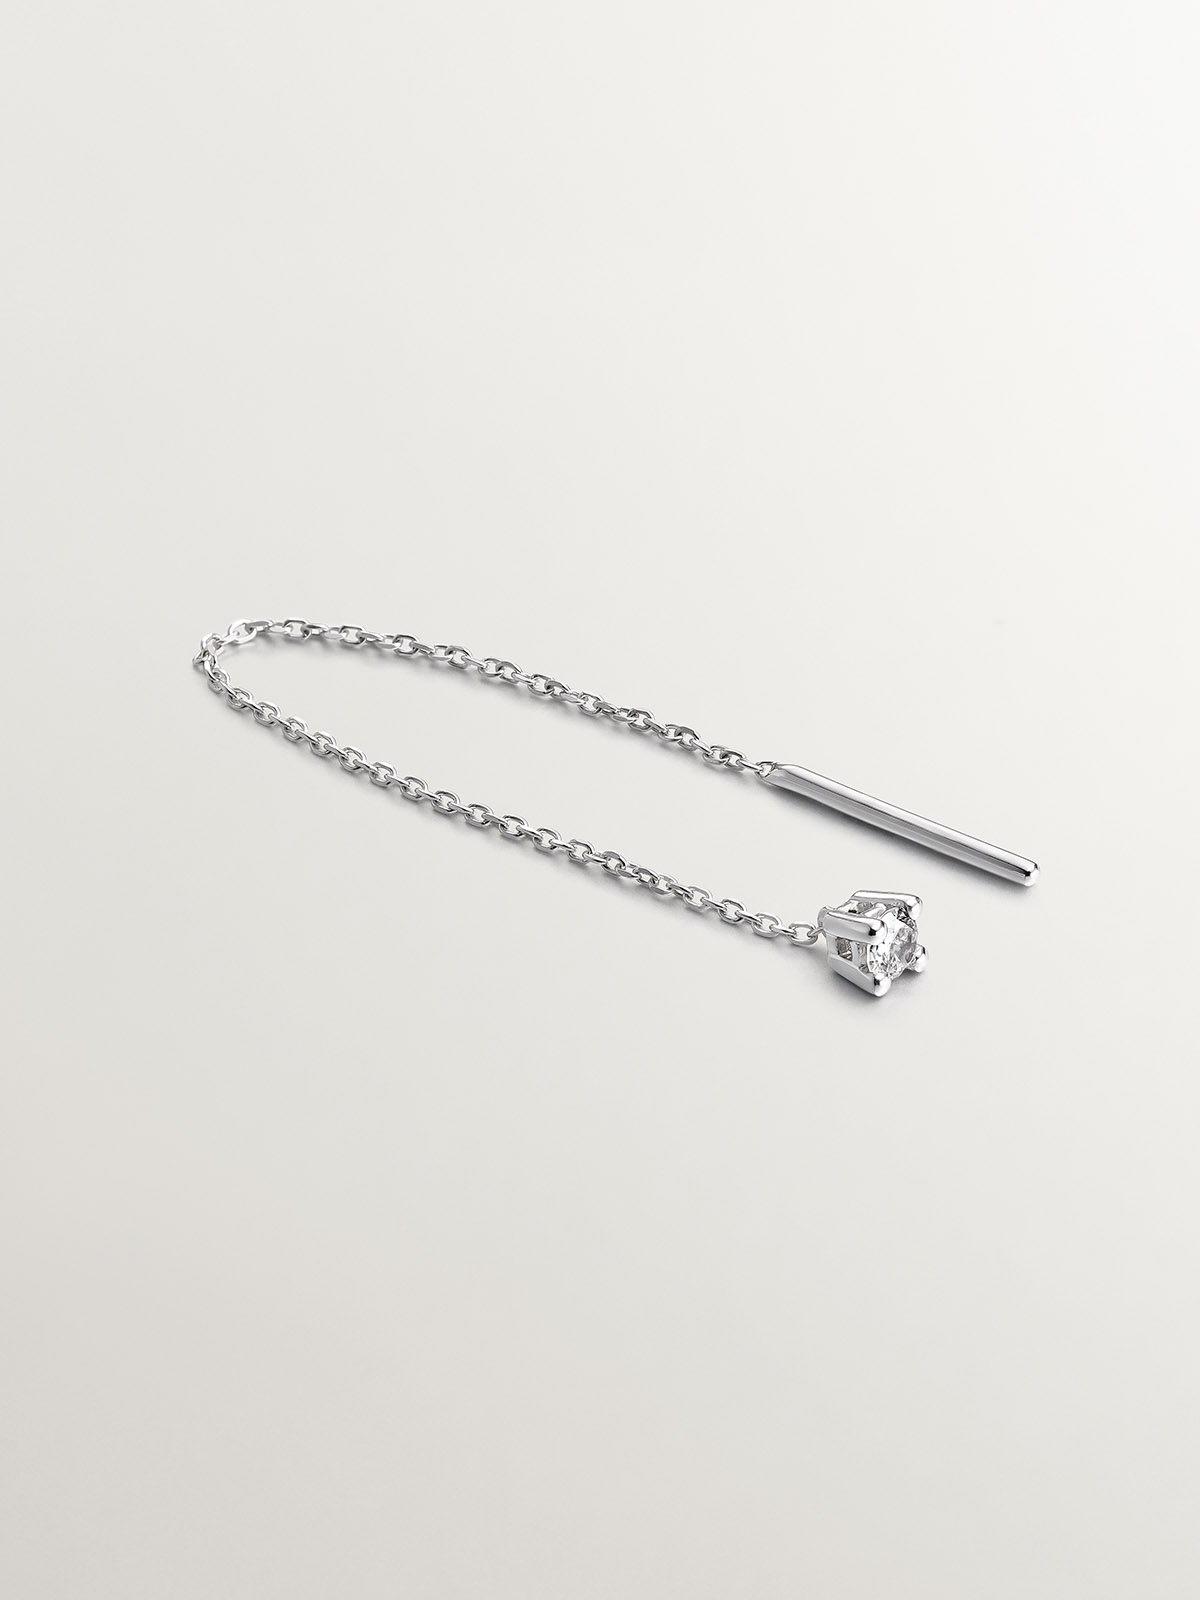 Individual long 18K white gold earring with chain and diamond.